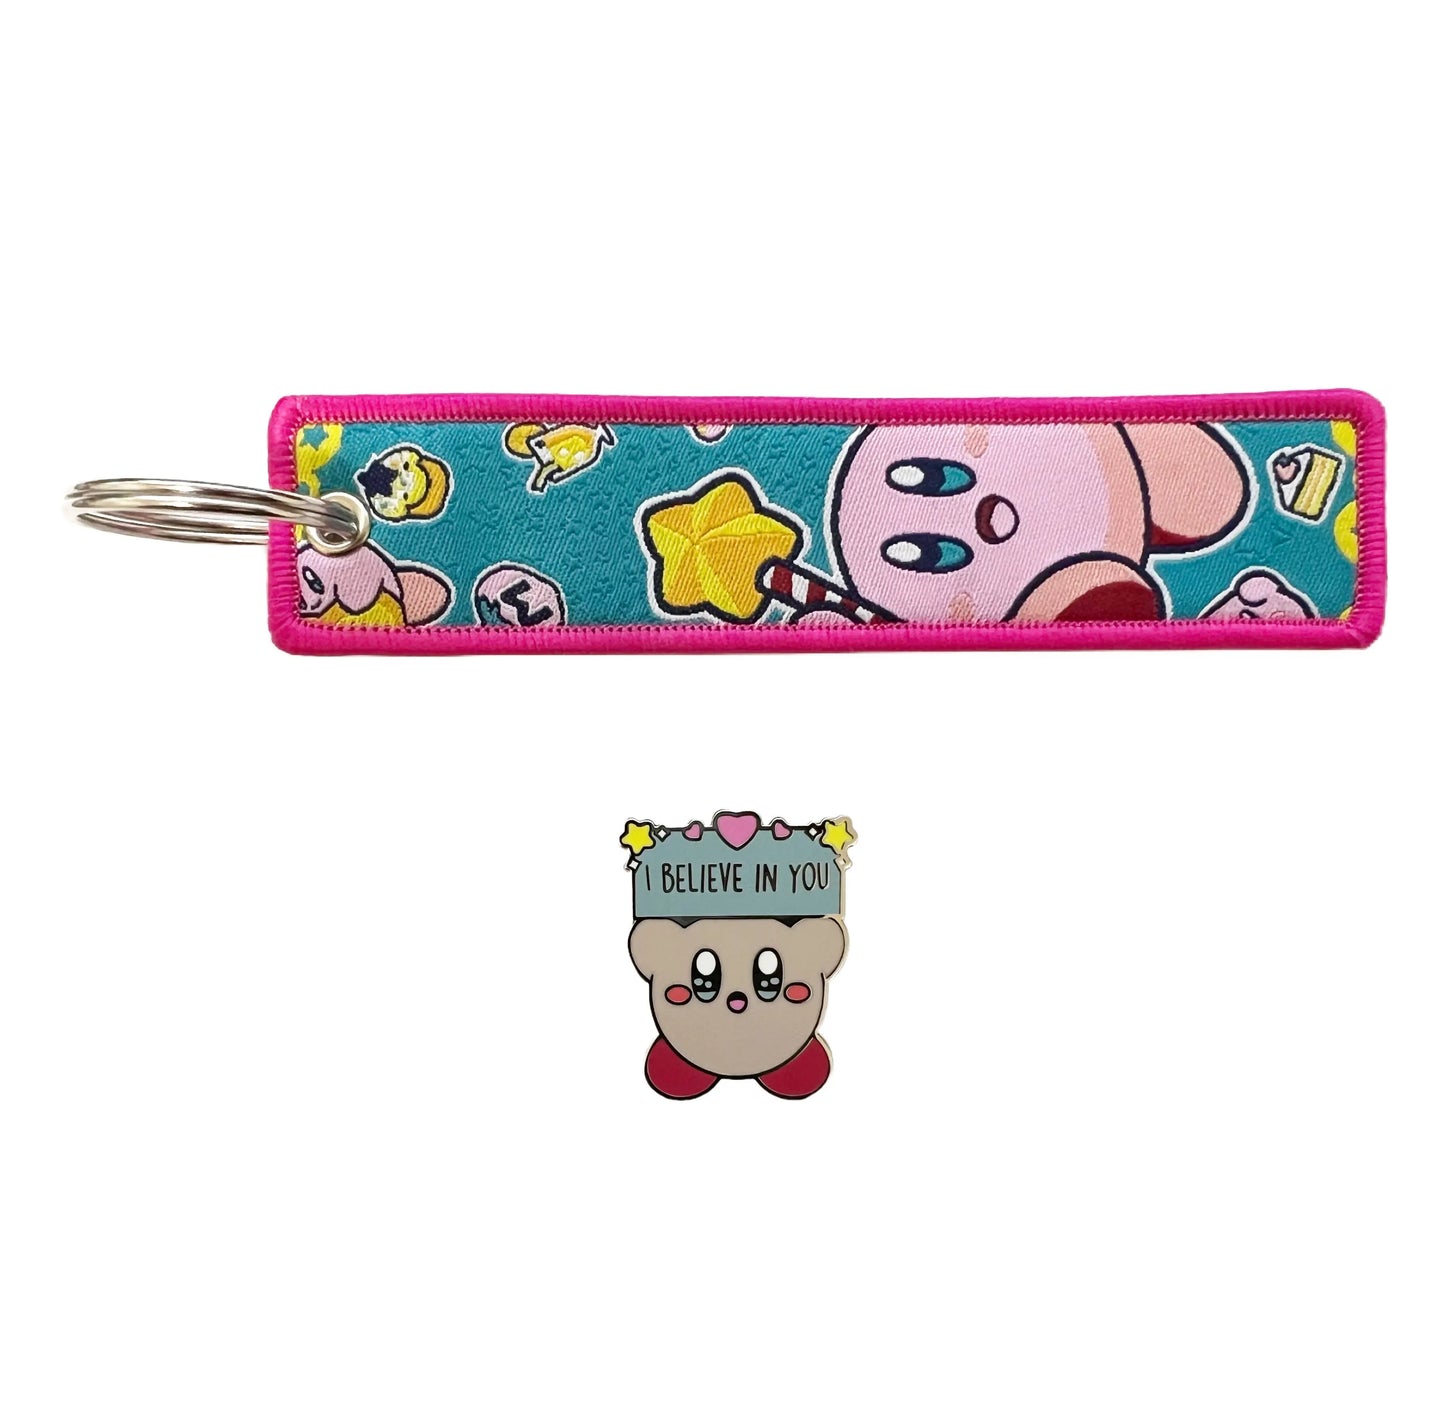 Japanese Video Game Kirby Themed Set of One Embroidered Fabric Keychain and One Enamel Metal Pin Badge